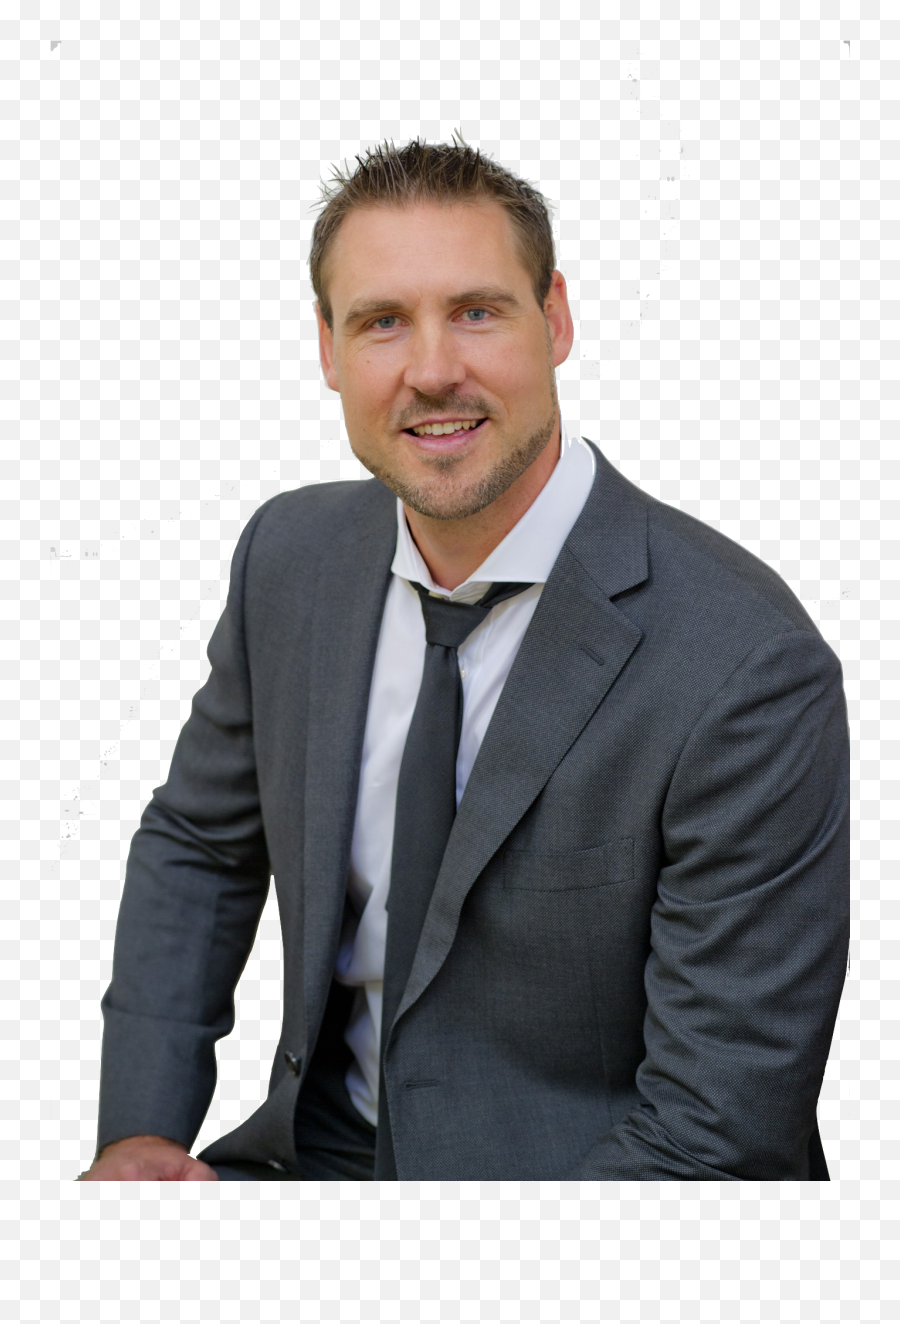 Andrew Transparent Background Purity Chiropractic - Businessperson Png,Transparent Timbs